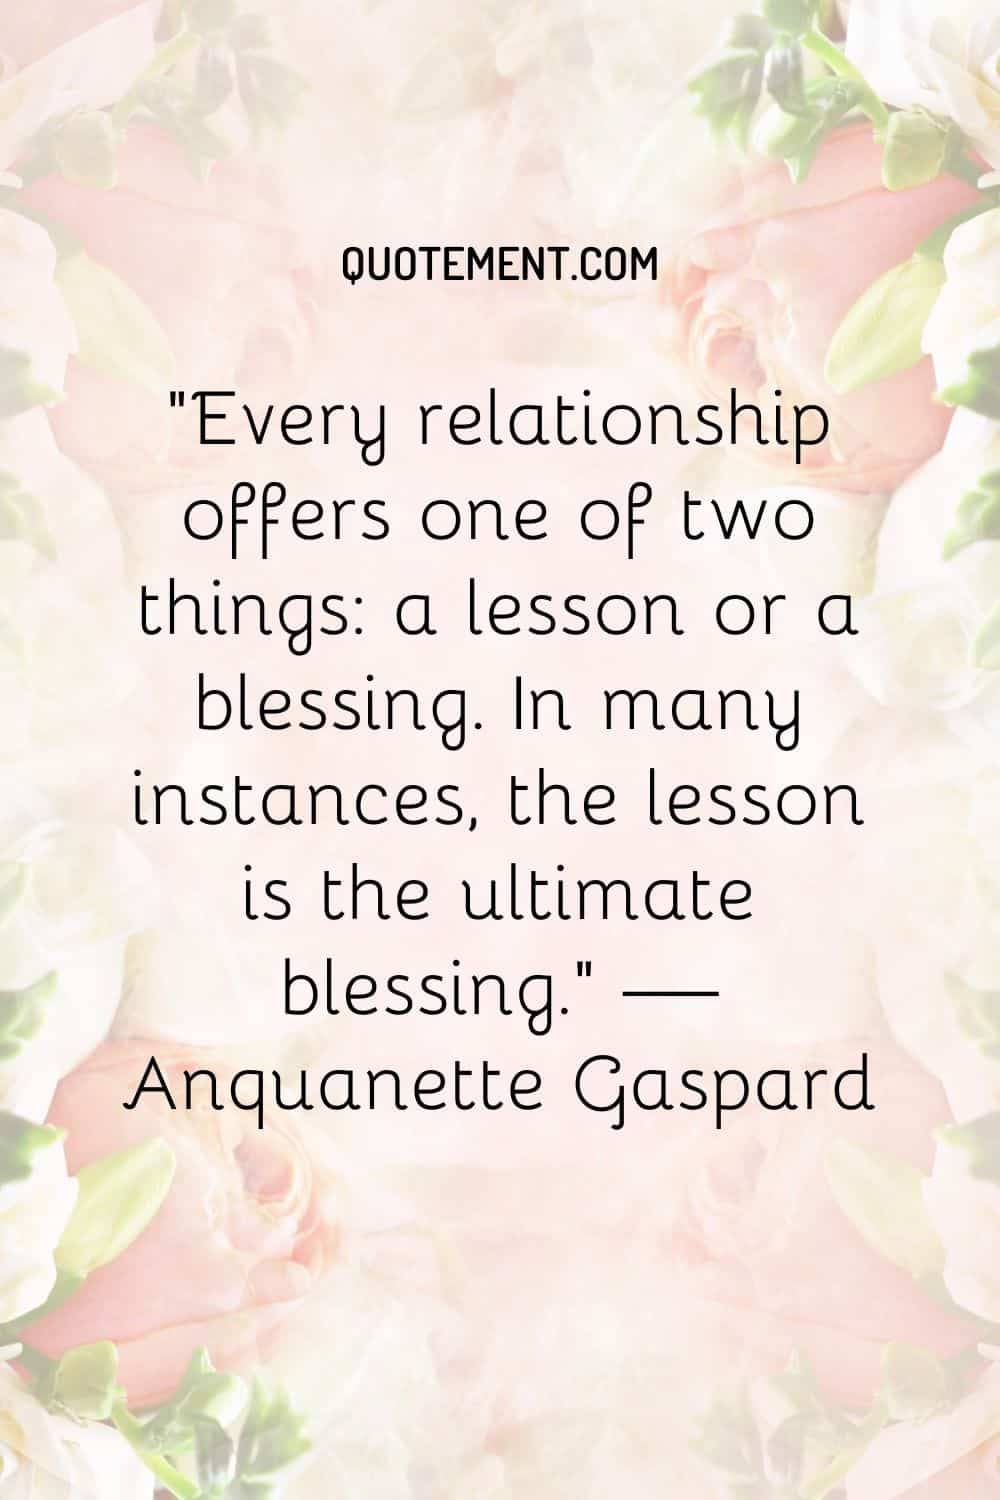 Every relationship offers one of two things a lesson or a blessing. In many instances, the lesson is the ultimate blessing